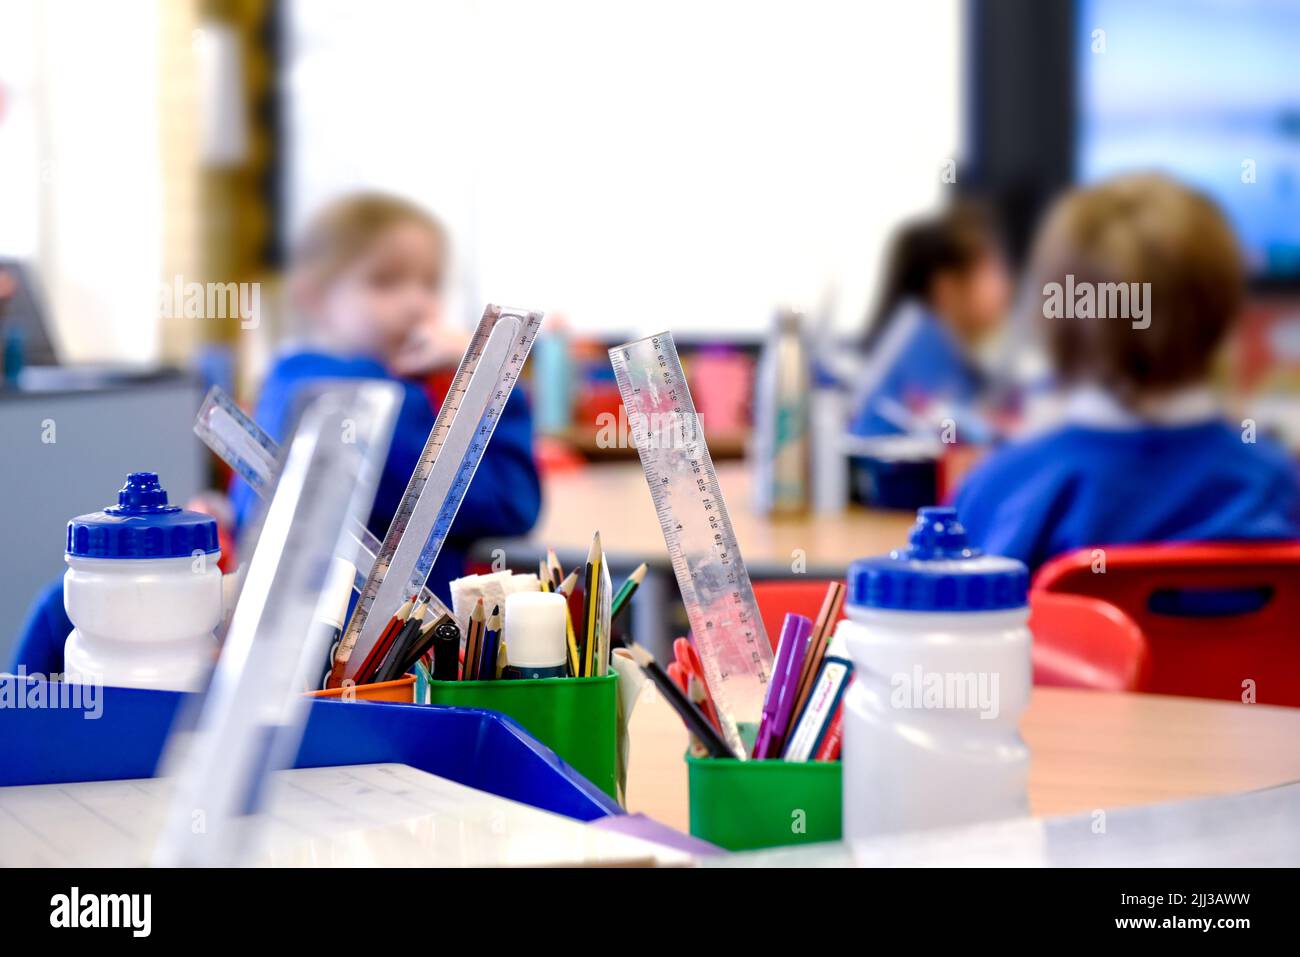 School classroom scene with kids learning in background Stock Photo